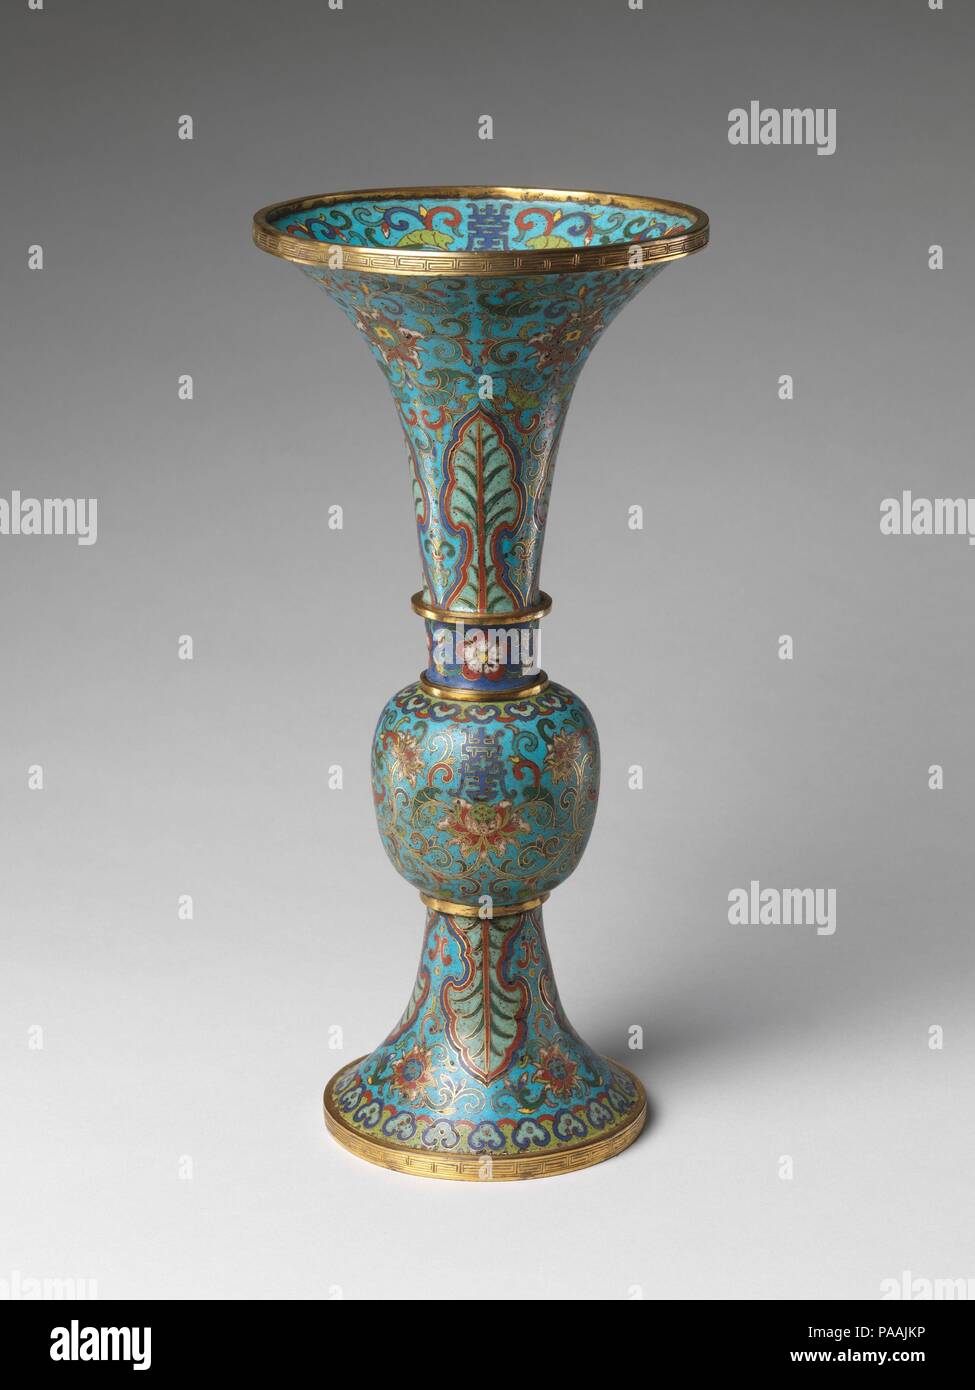 Vase from a Set of Five-Piece Altar Set (Wugong). Culture: China.  Dimensions: H. 13 in. (33 cm); Diam. of rim 6 1/8 in. (15.6 cm); Diam. of  foot 4 5/8 in. (11.7